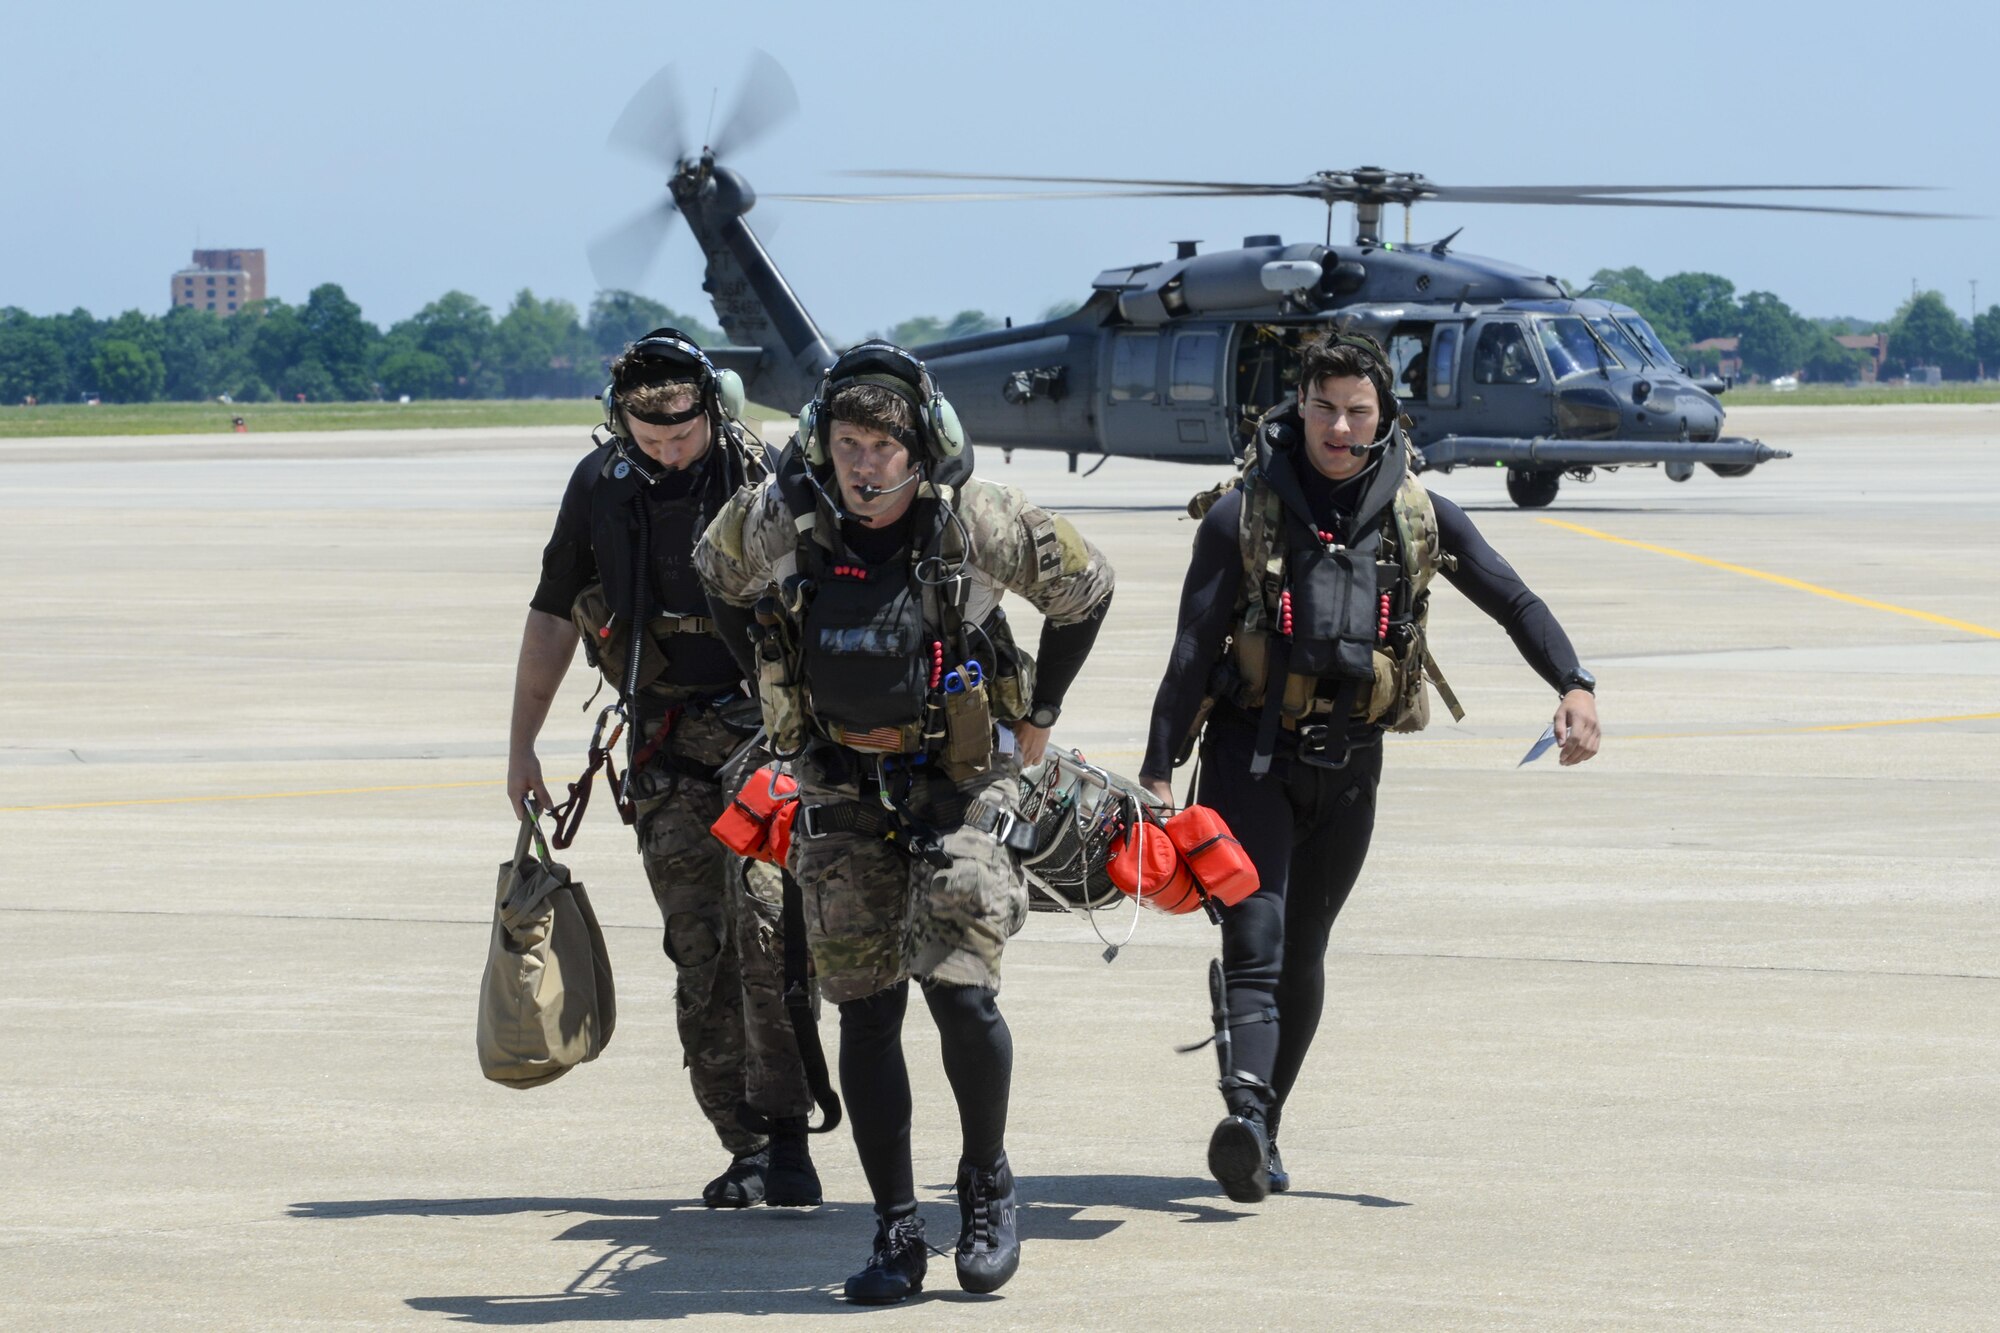 From left, Staff Sgt. Robert Hall, Staff Sgt. Travis Lester, and Senior Airman Eddie Judge, all 38th Rescue Squadron pararescuemen assigned to Moody Air Force Base, Ga., carry an Airman with simulated injuries toward a 3rd Airlift Squadron C-17 Globemaster III, May 17, 2017, during Exercise Rapid Rescue at Joint Base Langley-Eustis, Va. The C-17 was prepped and ready to takeoff for a simulated aeromedical evacuation flight when the search and rescue team arrived. (U.S. Air Force photo/Senior Airman Aaron J. Jenne)